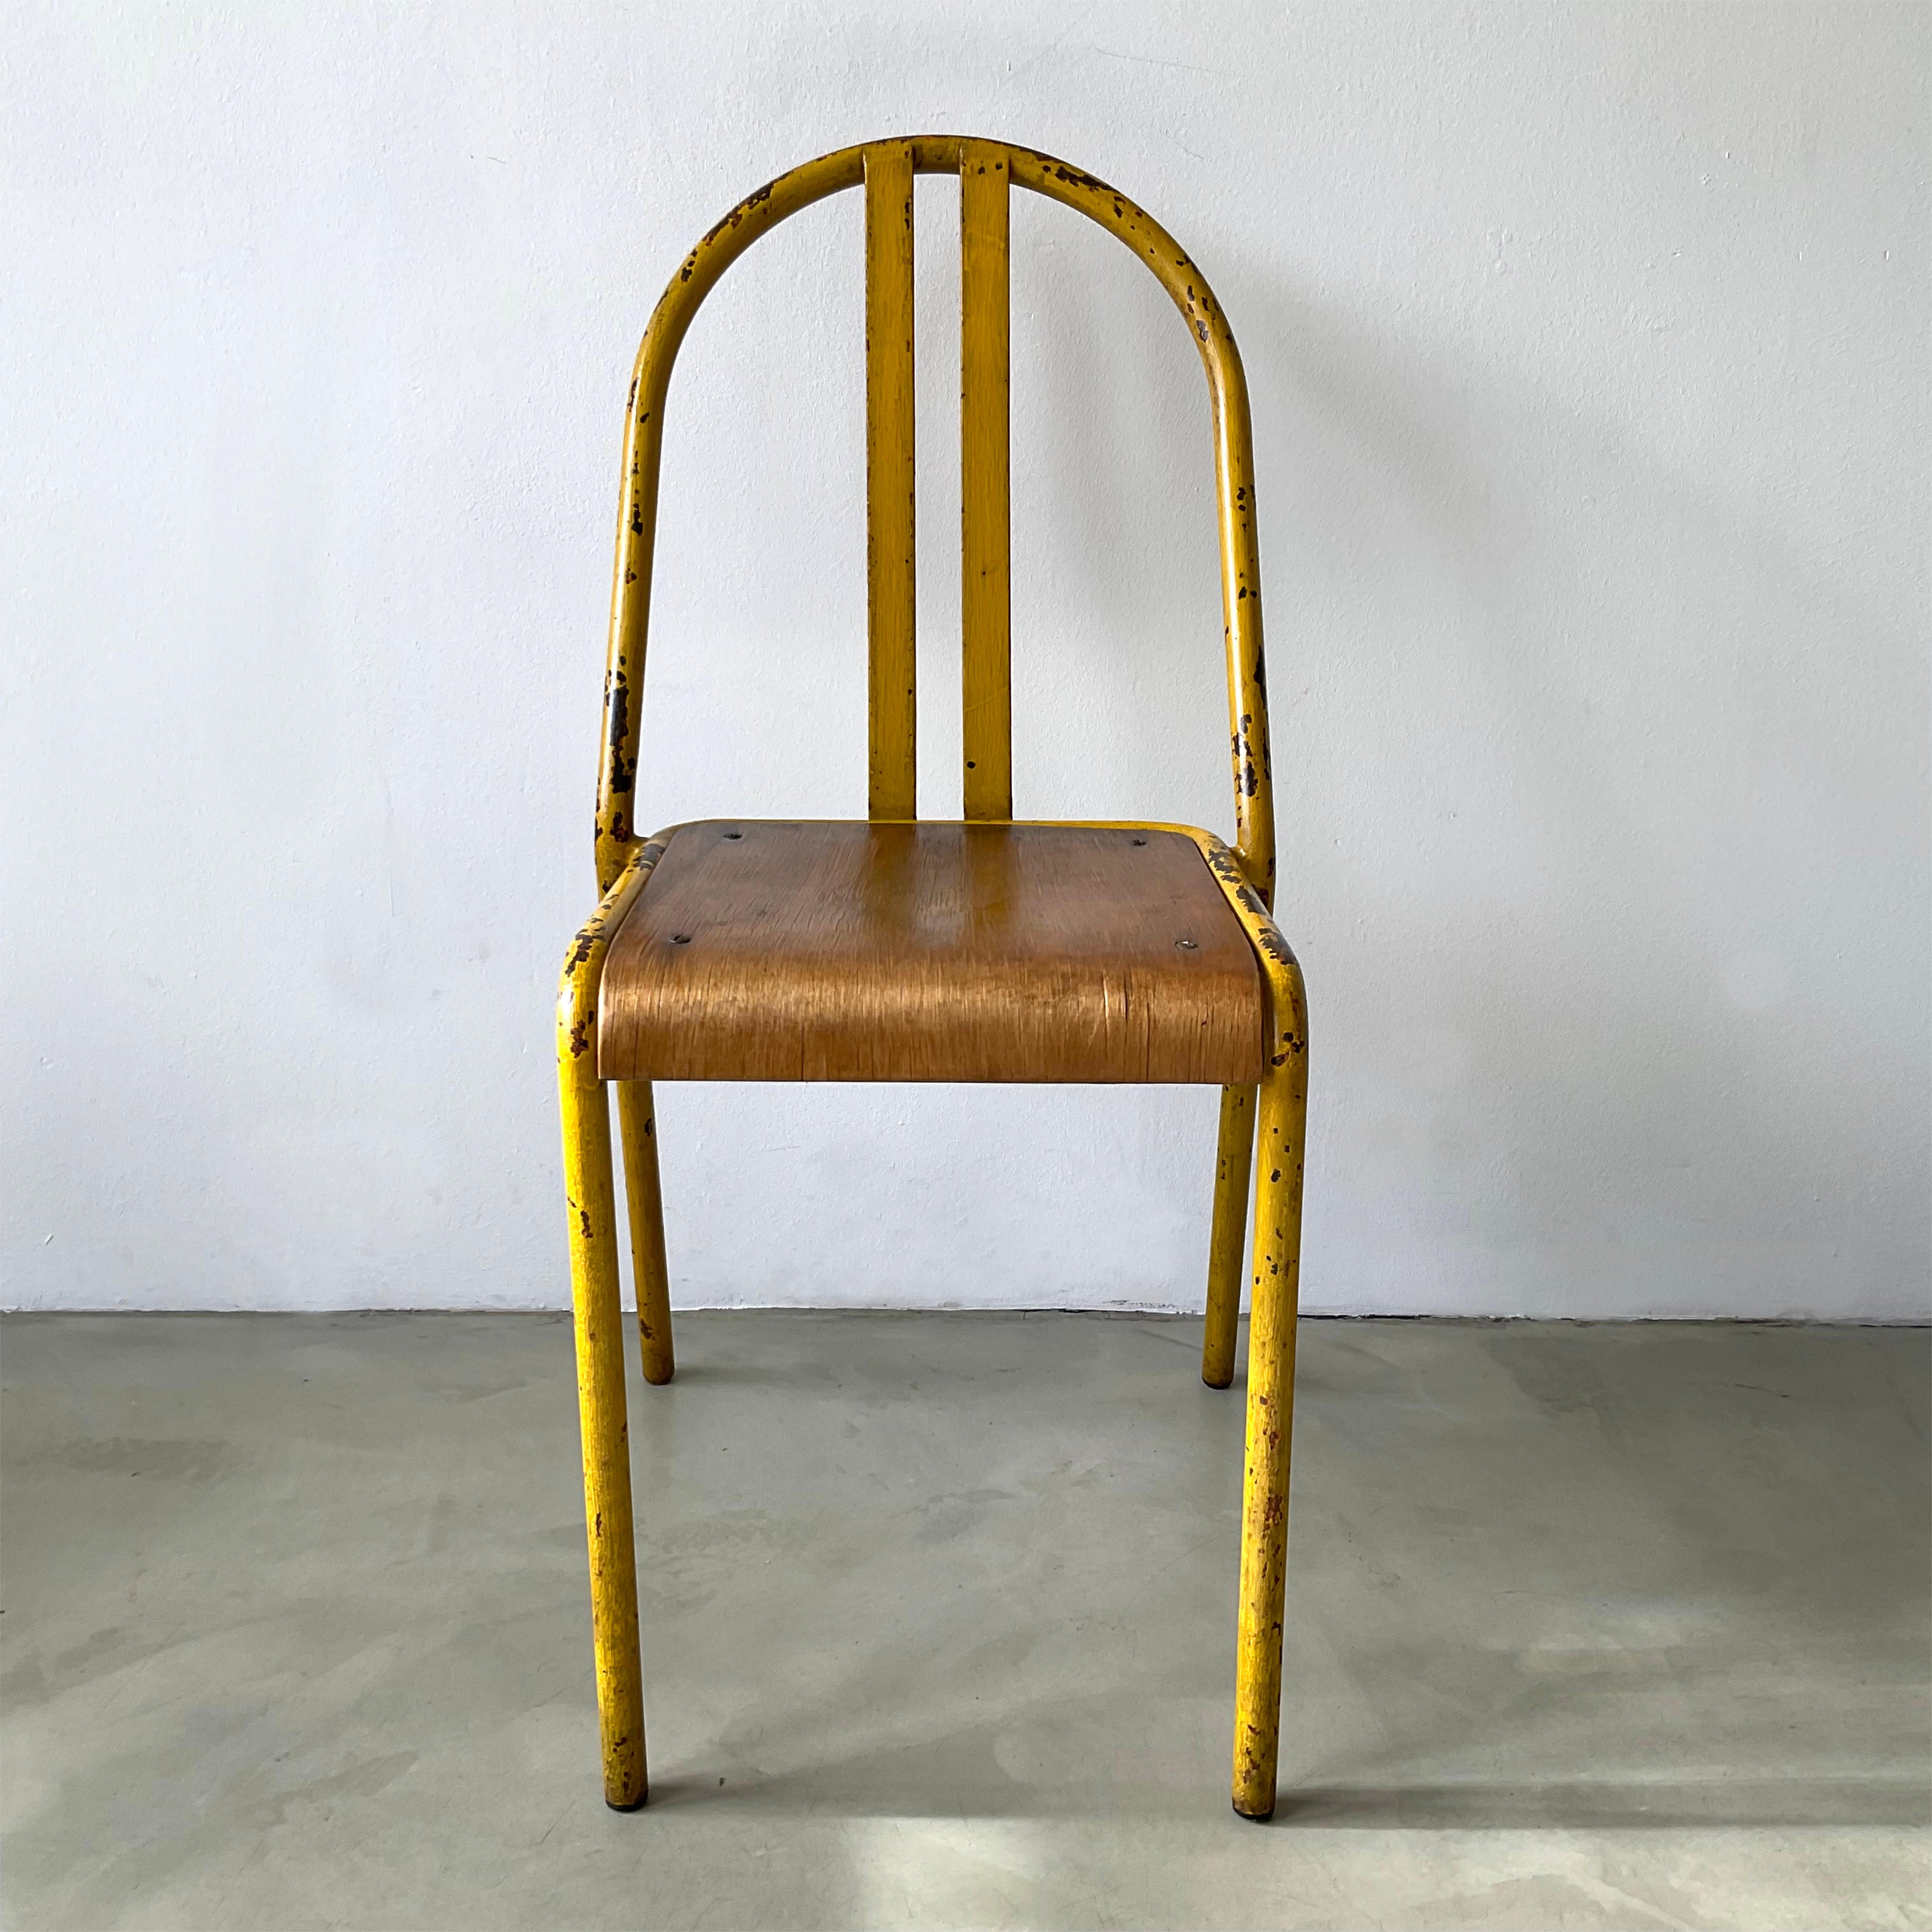 Mid-20th Century Authentic Early Modernist Chair Robert Mallet Stevens, France, 1930s For Sale